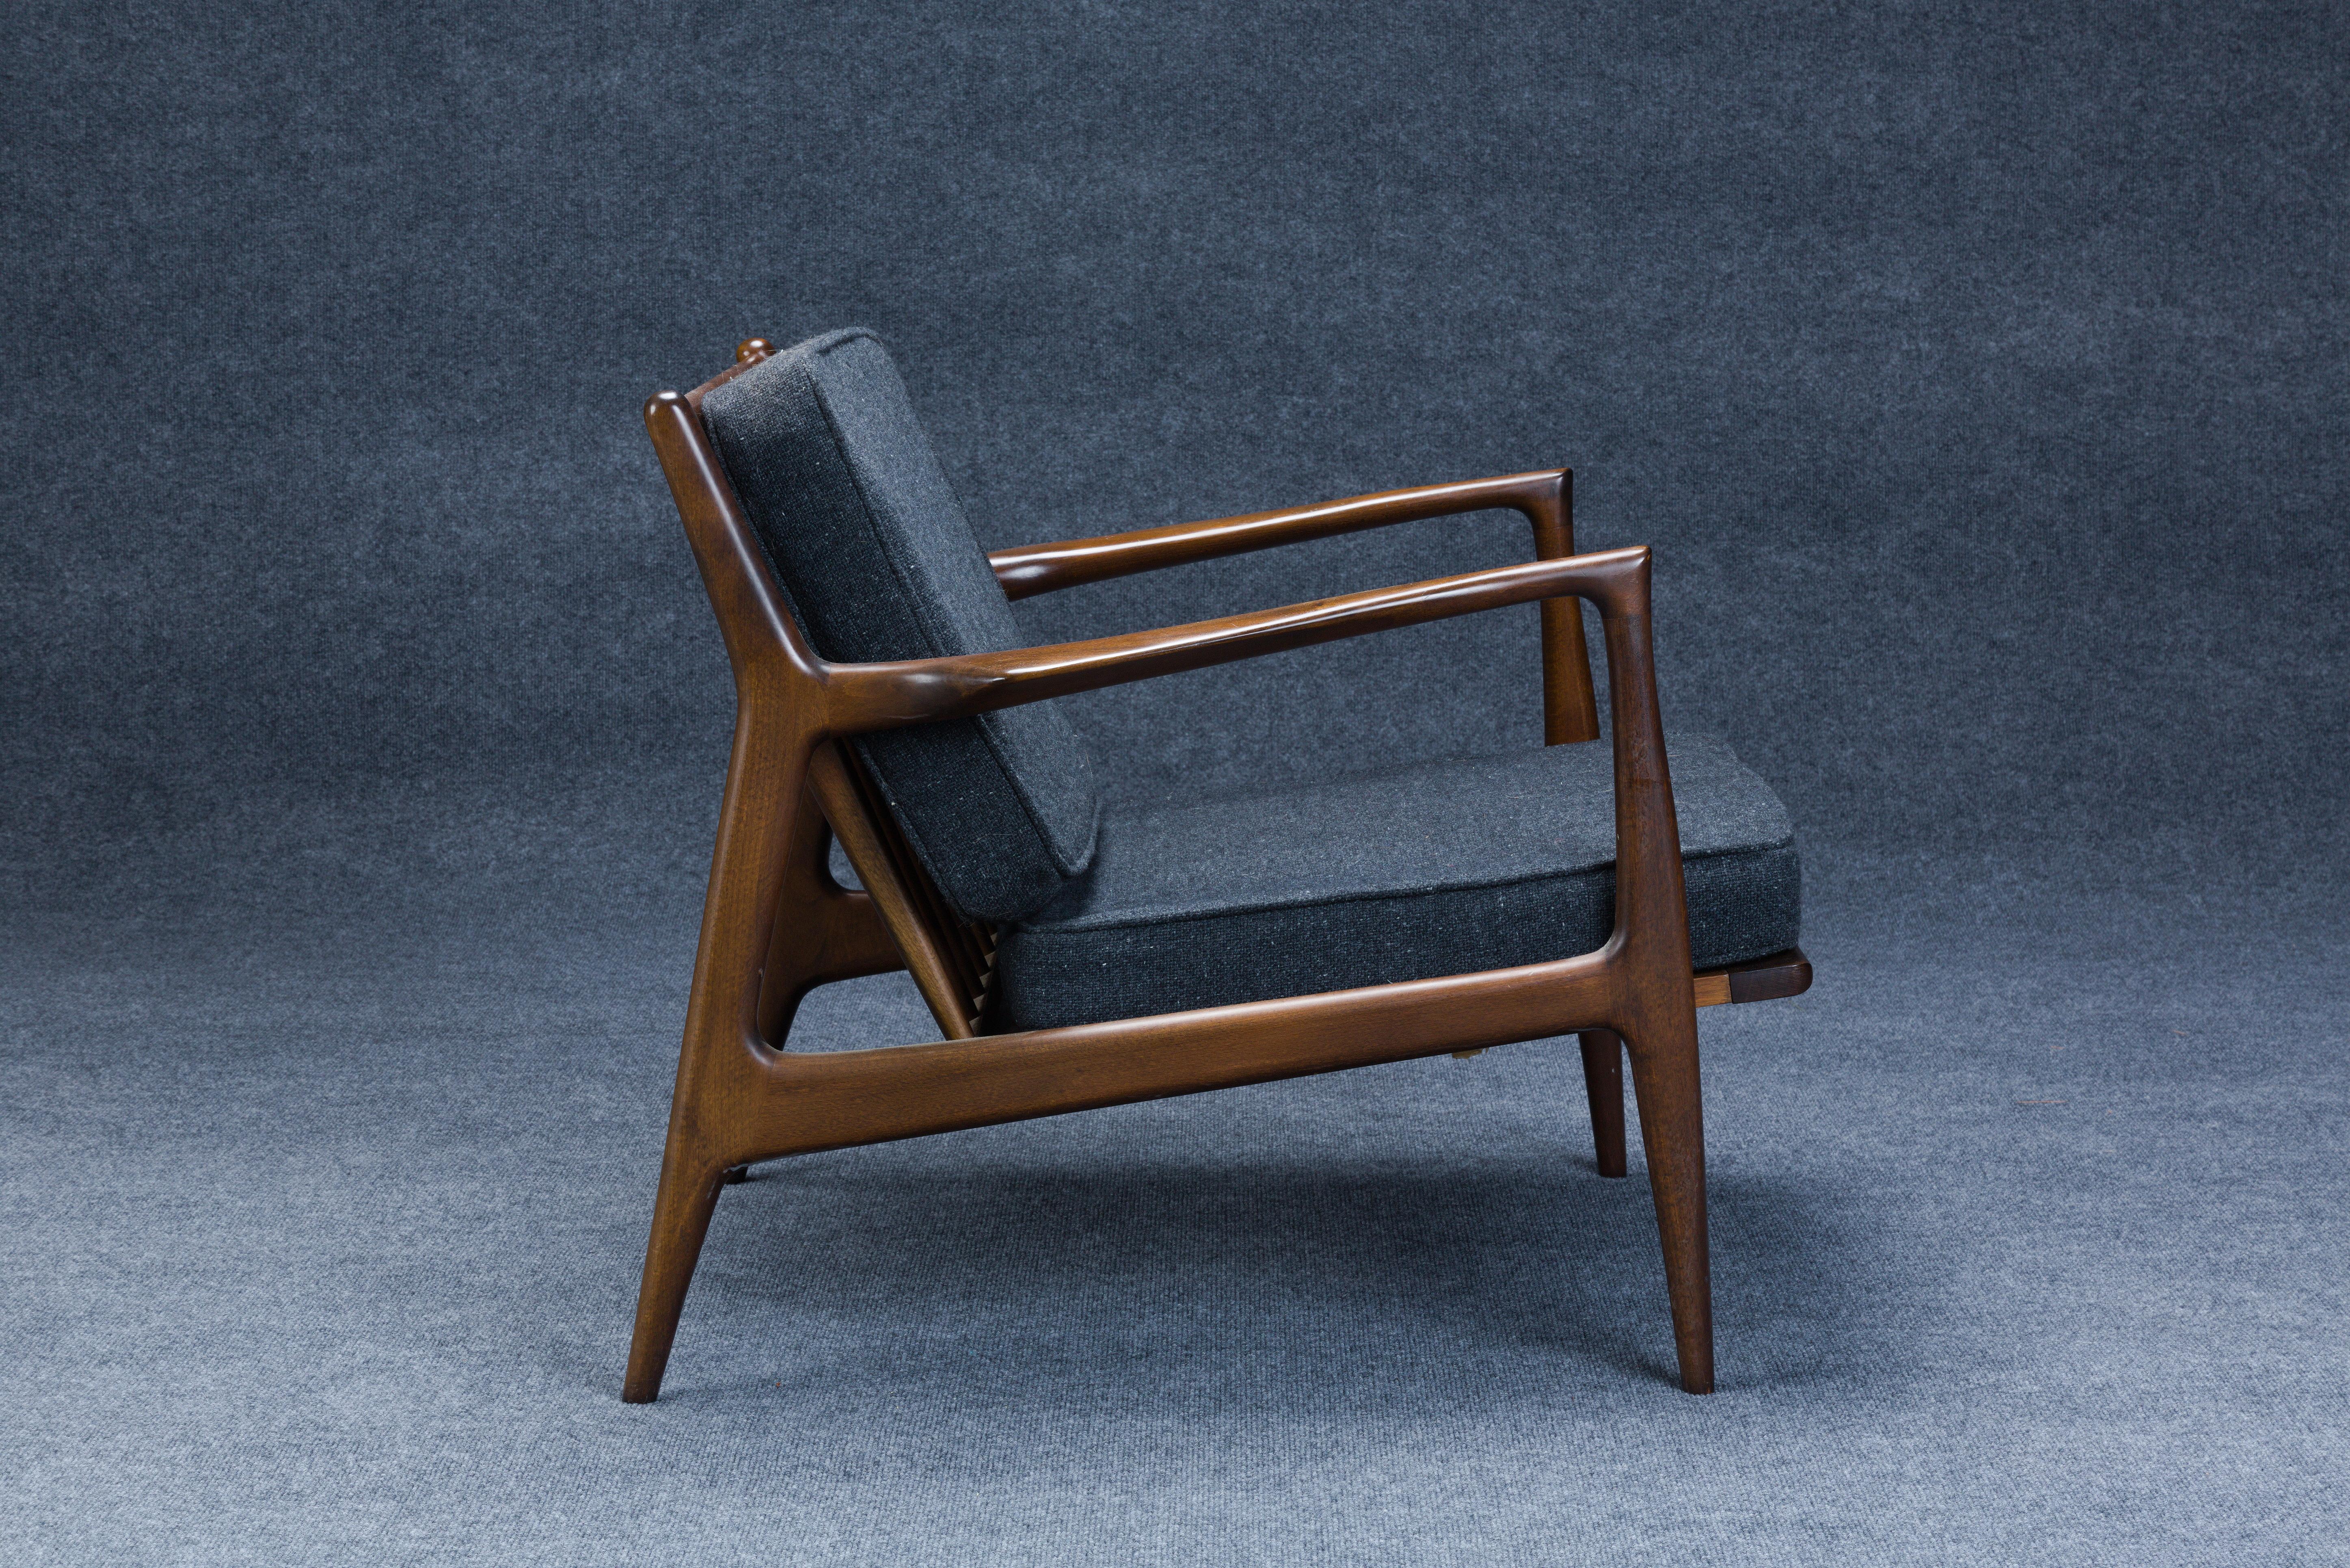 Upholstery Pair of Mid-Century Danish Modern Spear Lounge Chairs by Kofod-Larsen for Selig